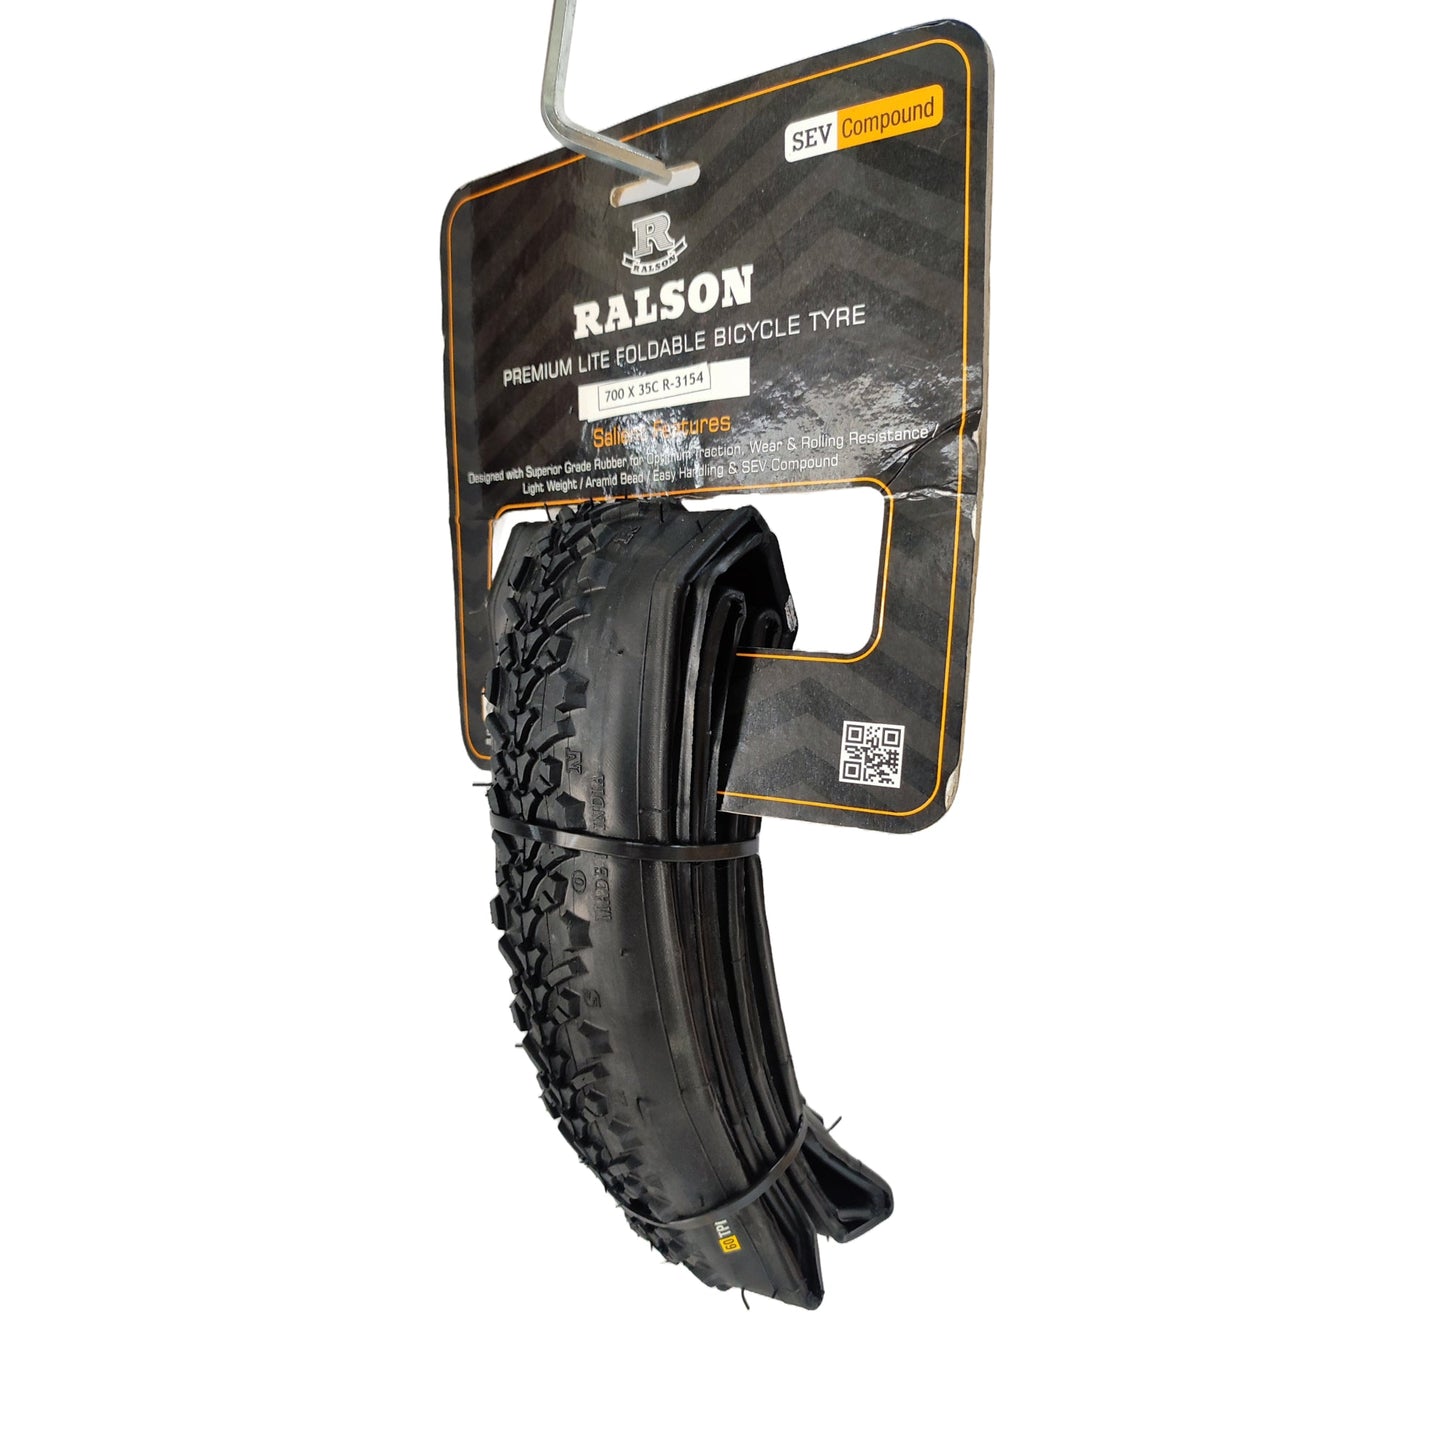 Bicycle tyre for hybrid bike, high puncher resistance tyre 60 tpi by ralson full view 